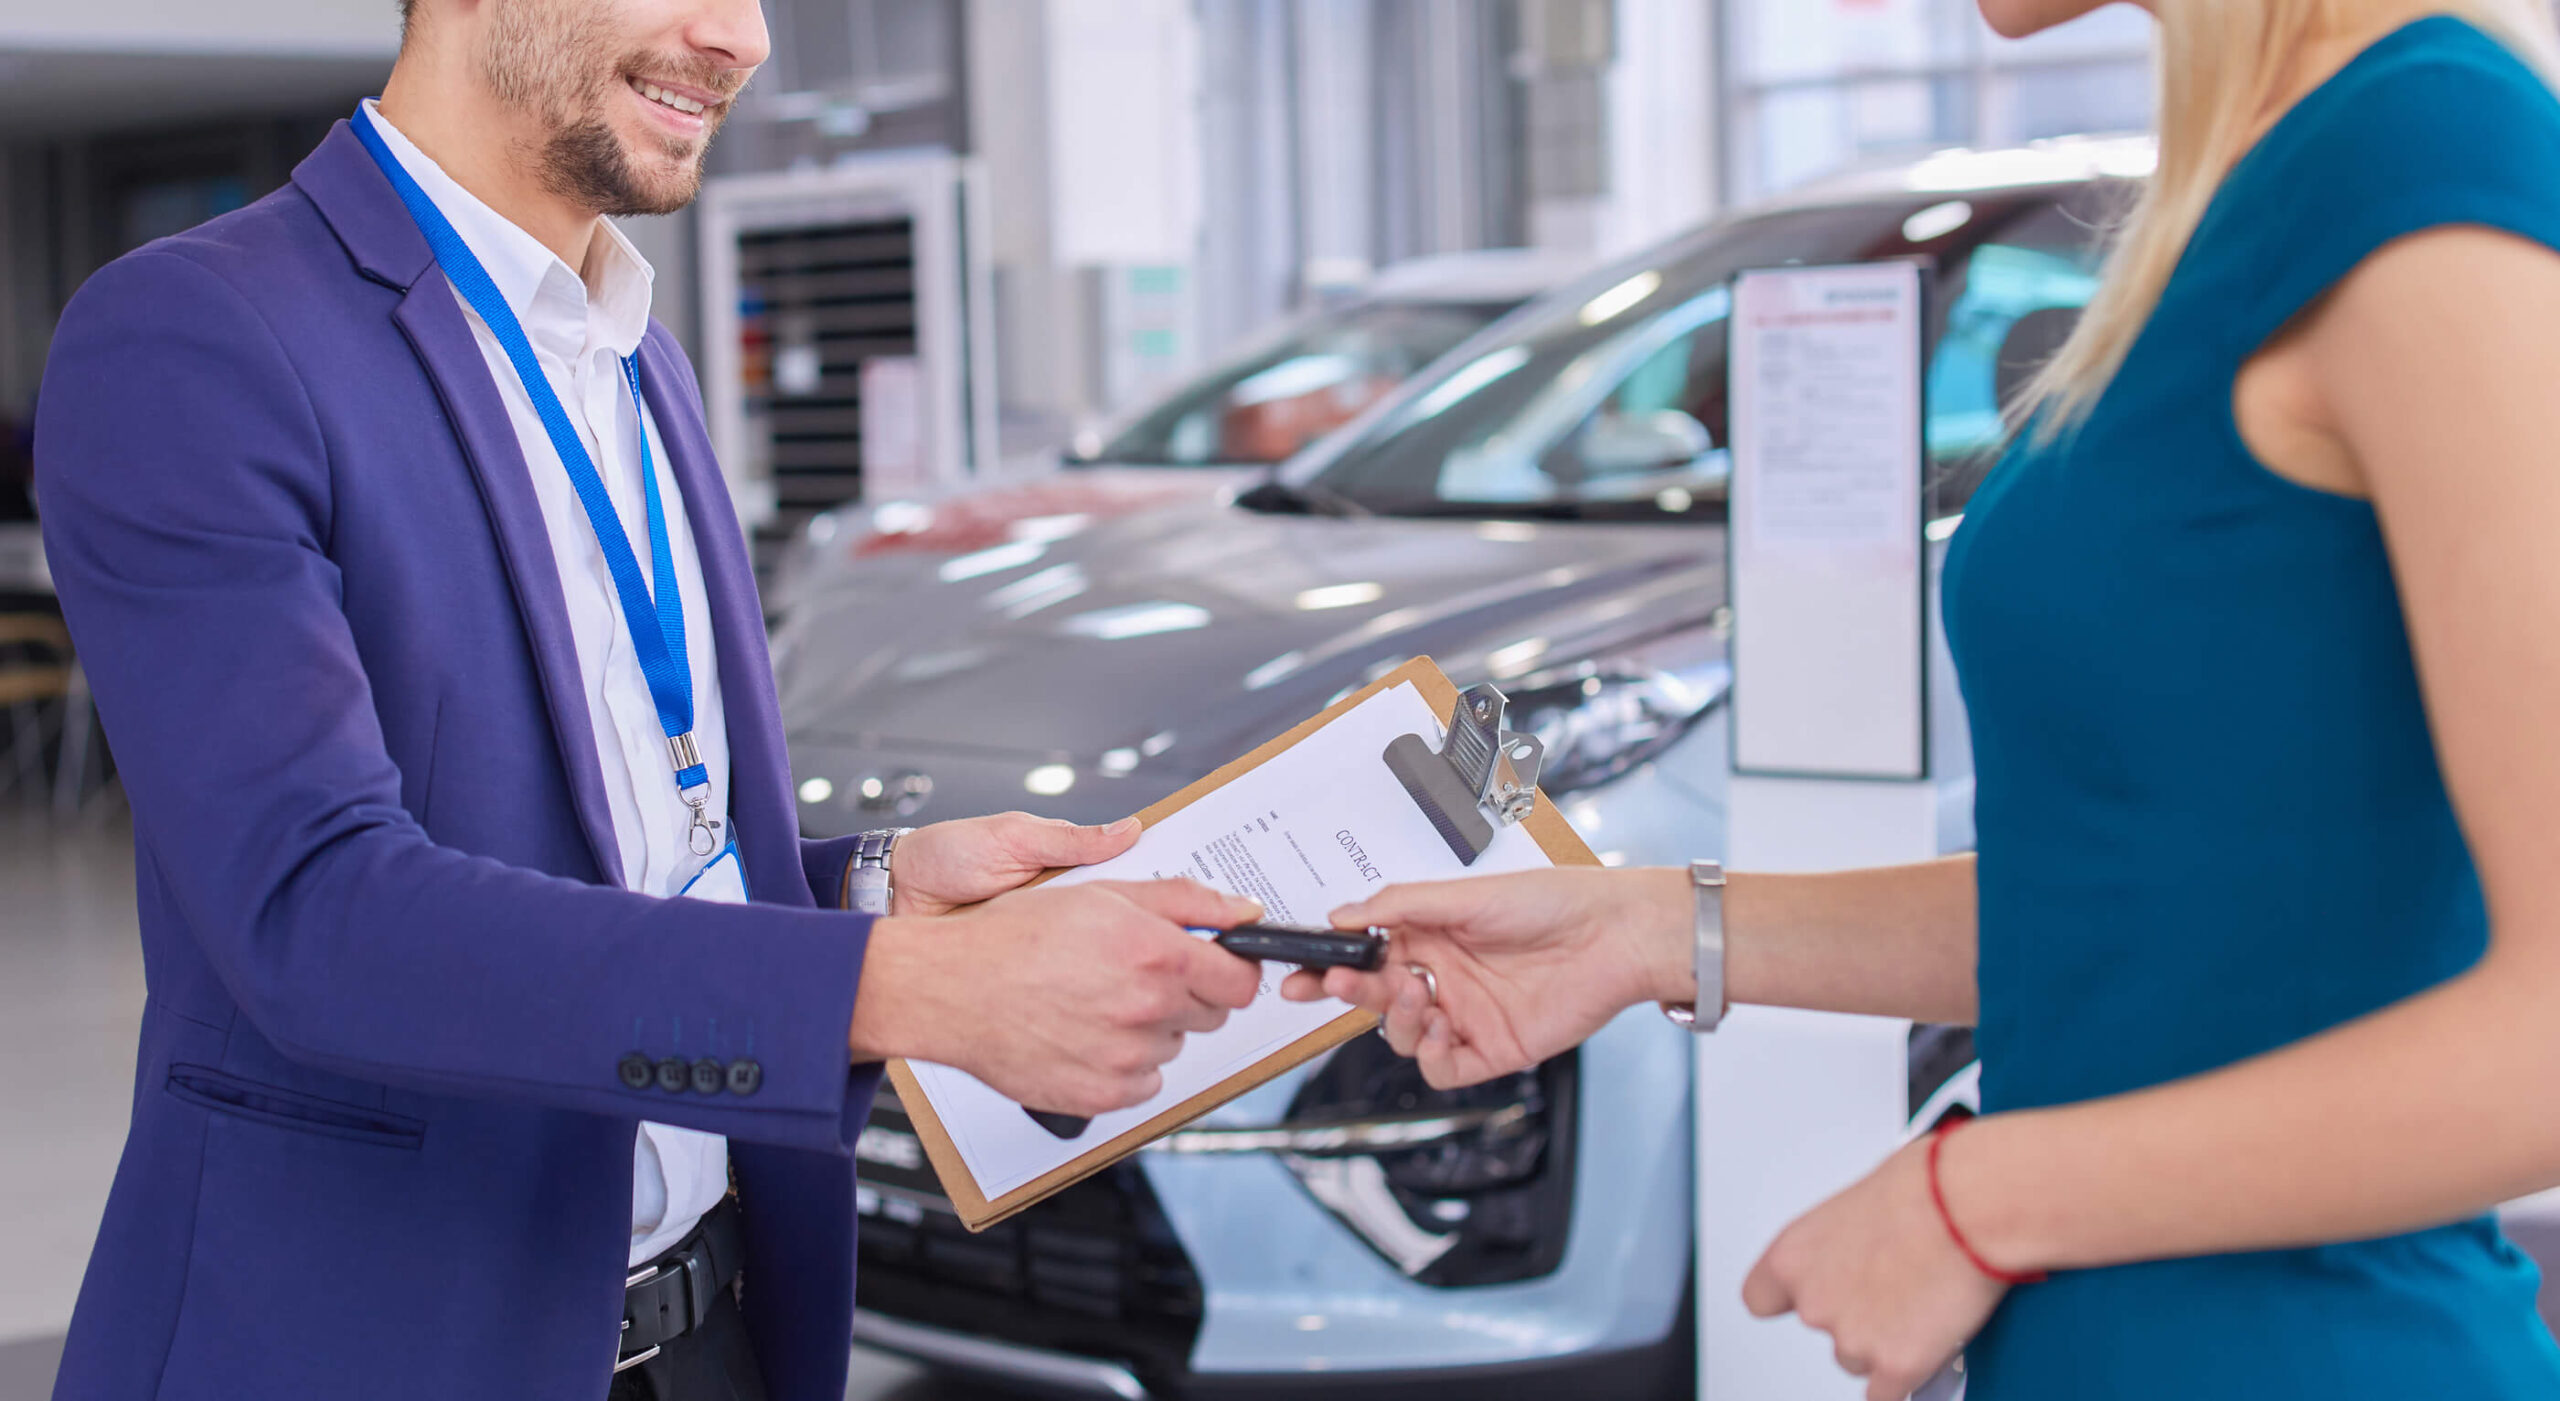 Selling My Car Online in New York City: Should I Use a Dealer or Go Private?